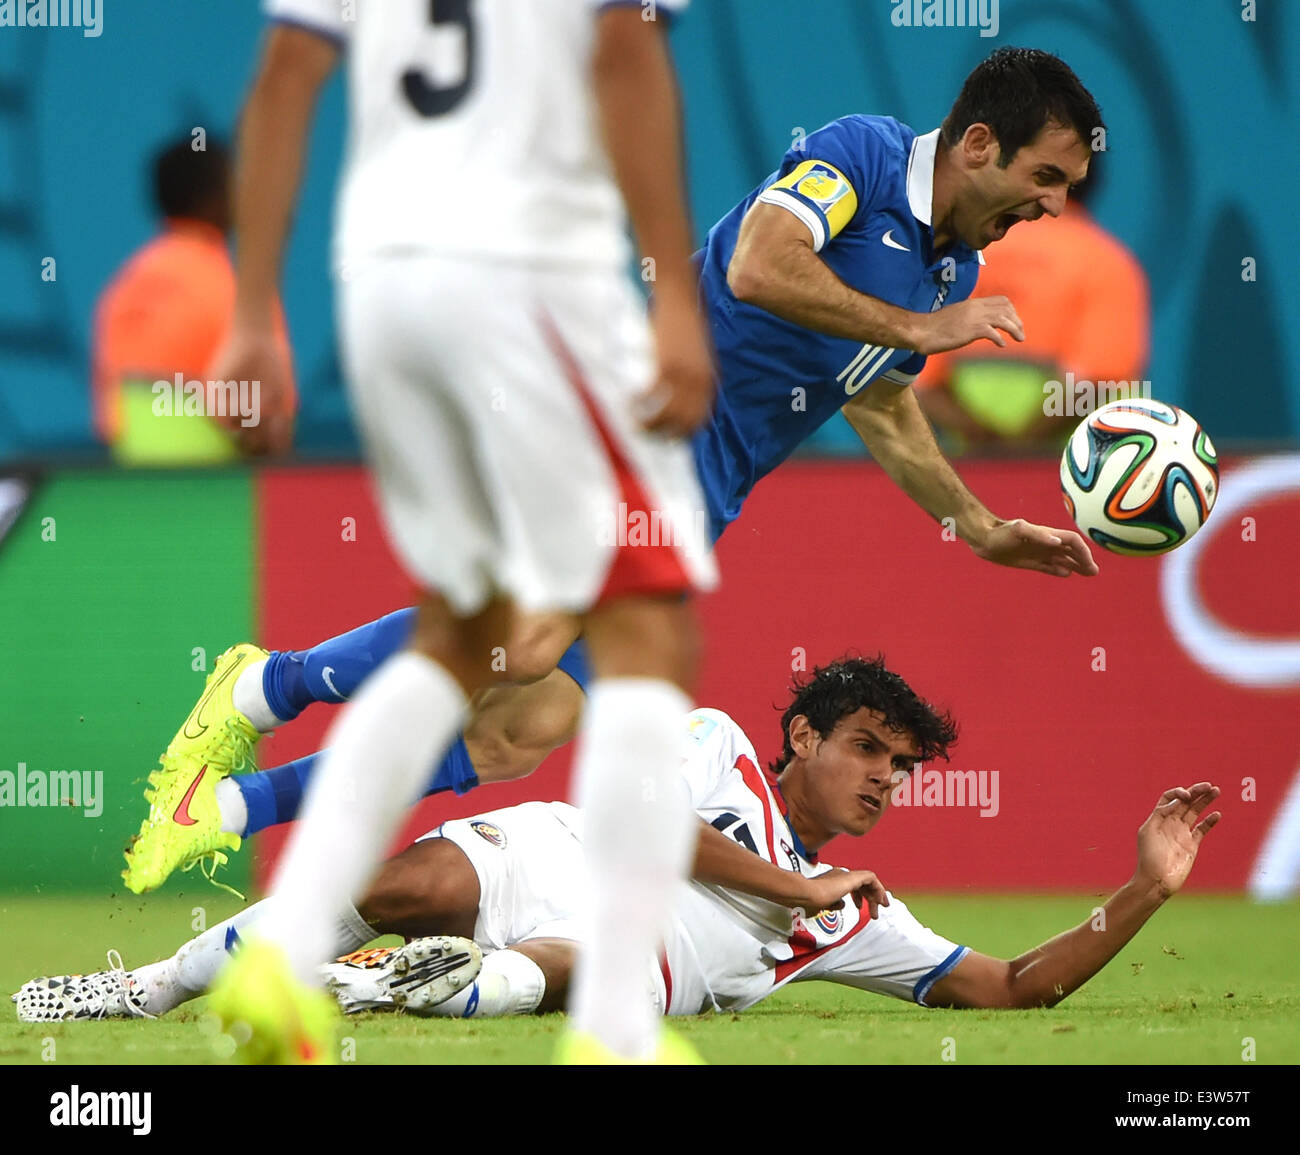 Recife, Brazil. 29th June, 2014. Greece's Giorgos Karagounis (C) falls down during a Round of 16 match between Costa Rica and Greece of 2014 FIFA World Cup at the Arena Pernambuco Stadium in Recife, Brazil, on June 29, 2014. Credit:  Guo Yong/Xinhua/Alamy Live News Stock Photo